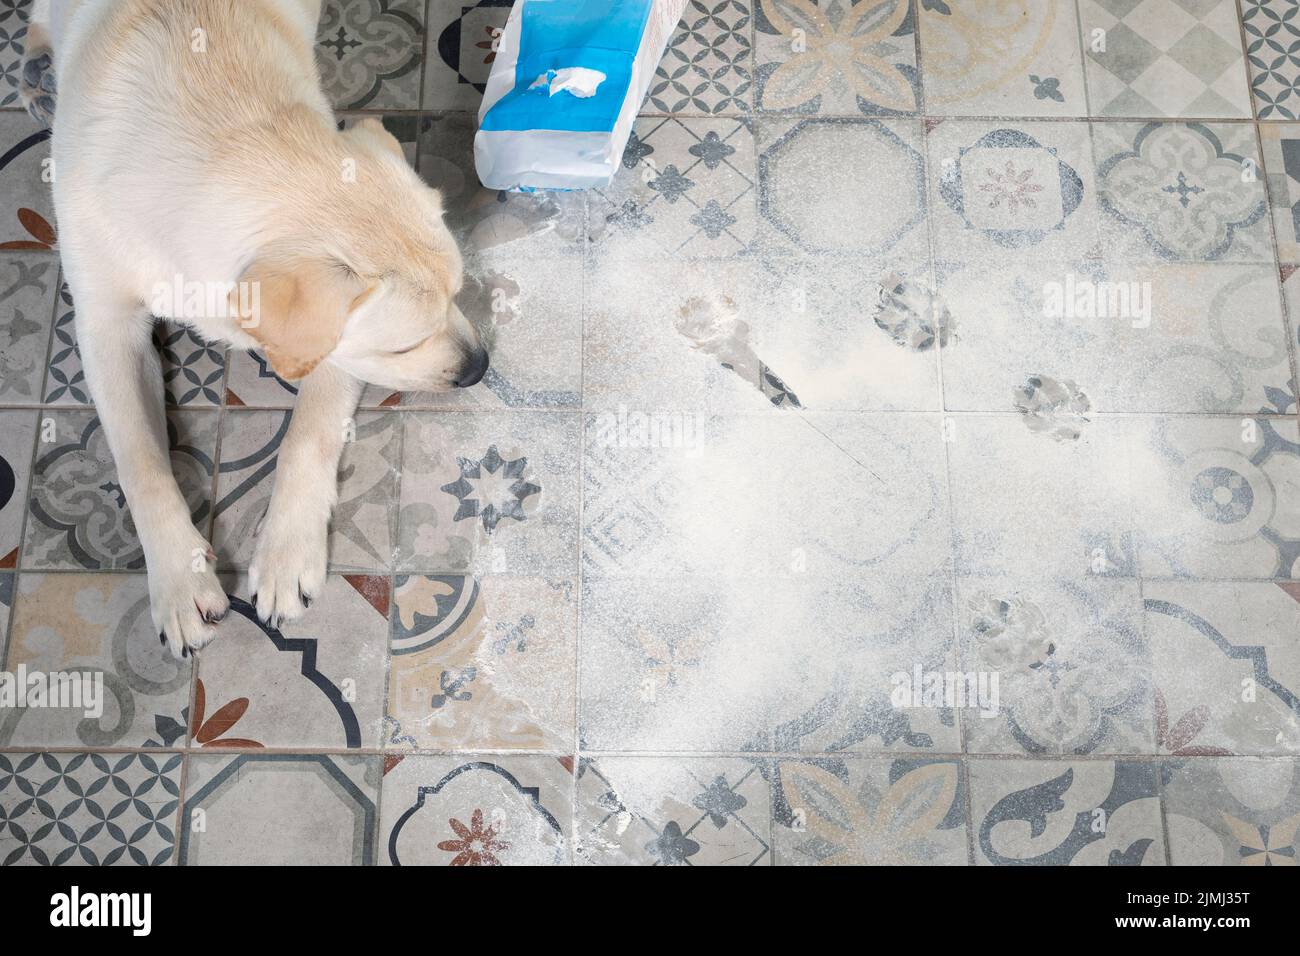 Labrador dog laying next to inverted packet of flour sprinkled on floor Stock Photo